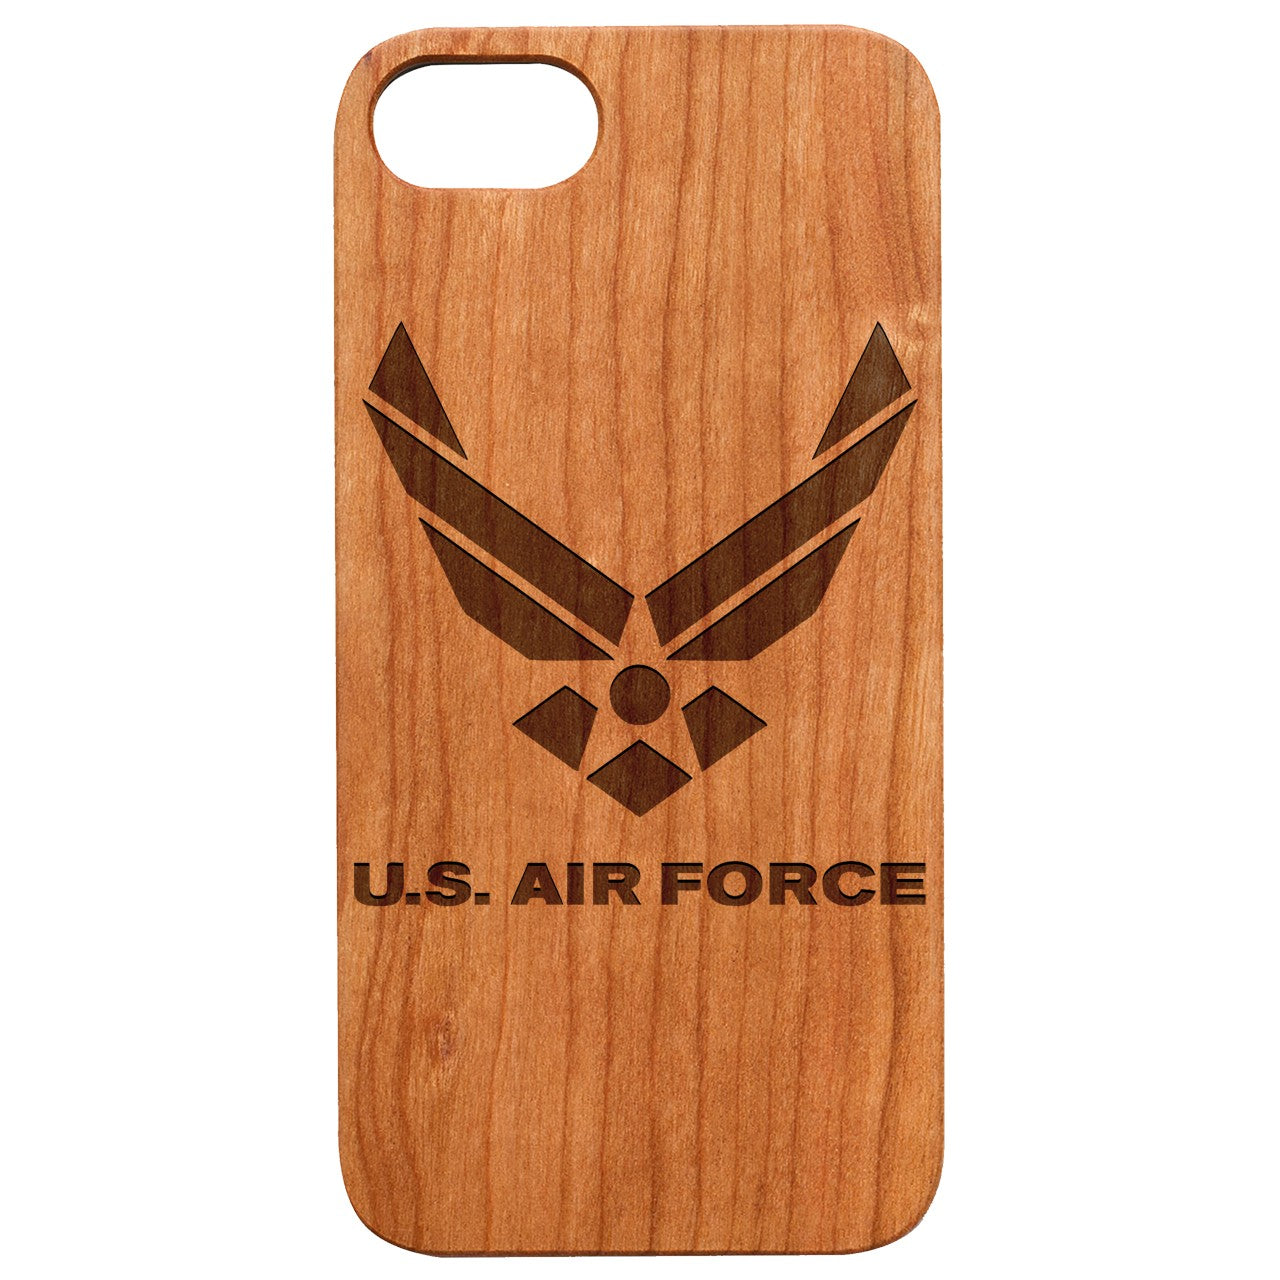  U.S. Airforce - Engraved - Wooden Phone Case - IPhone 13 Models